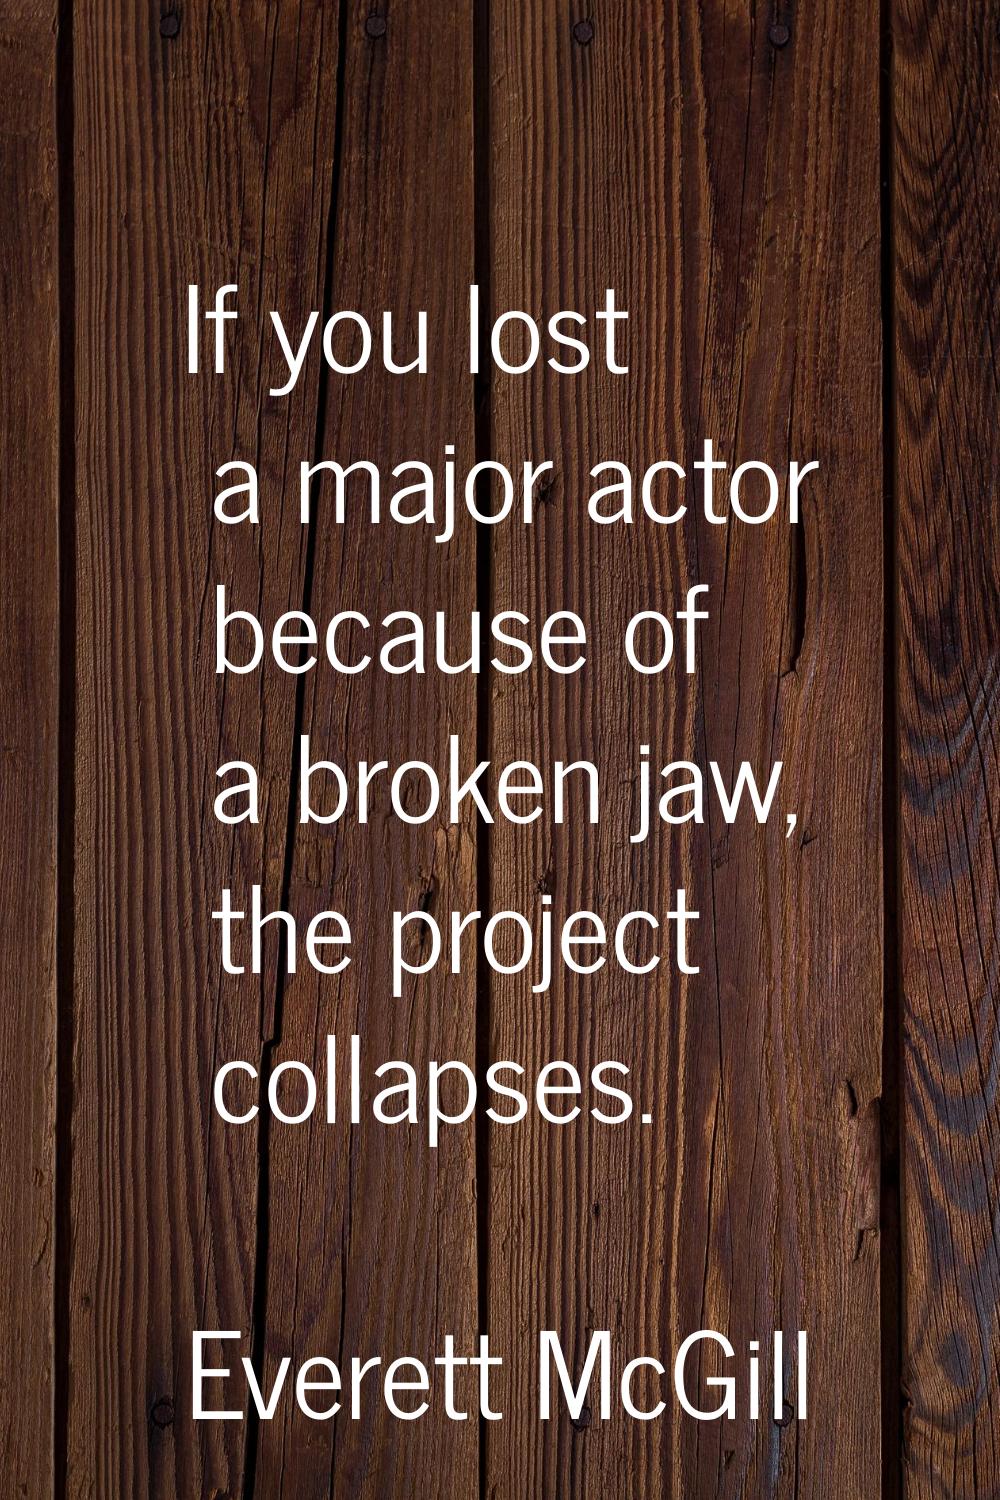 If you lost a major actor because of a broken jaw, the project collapses.